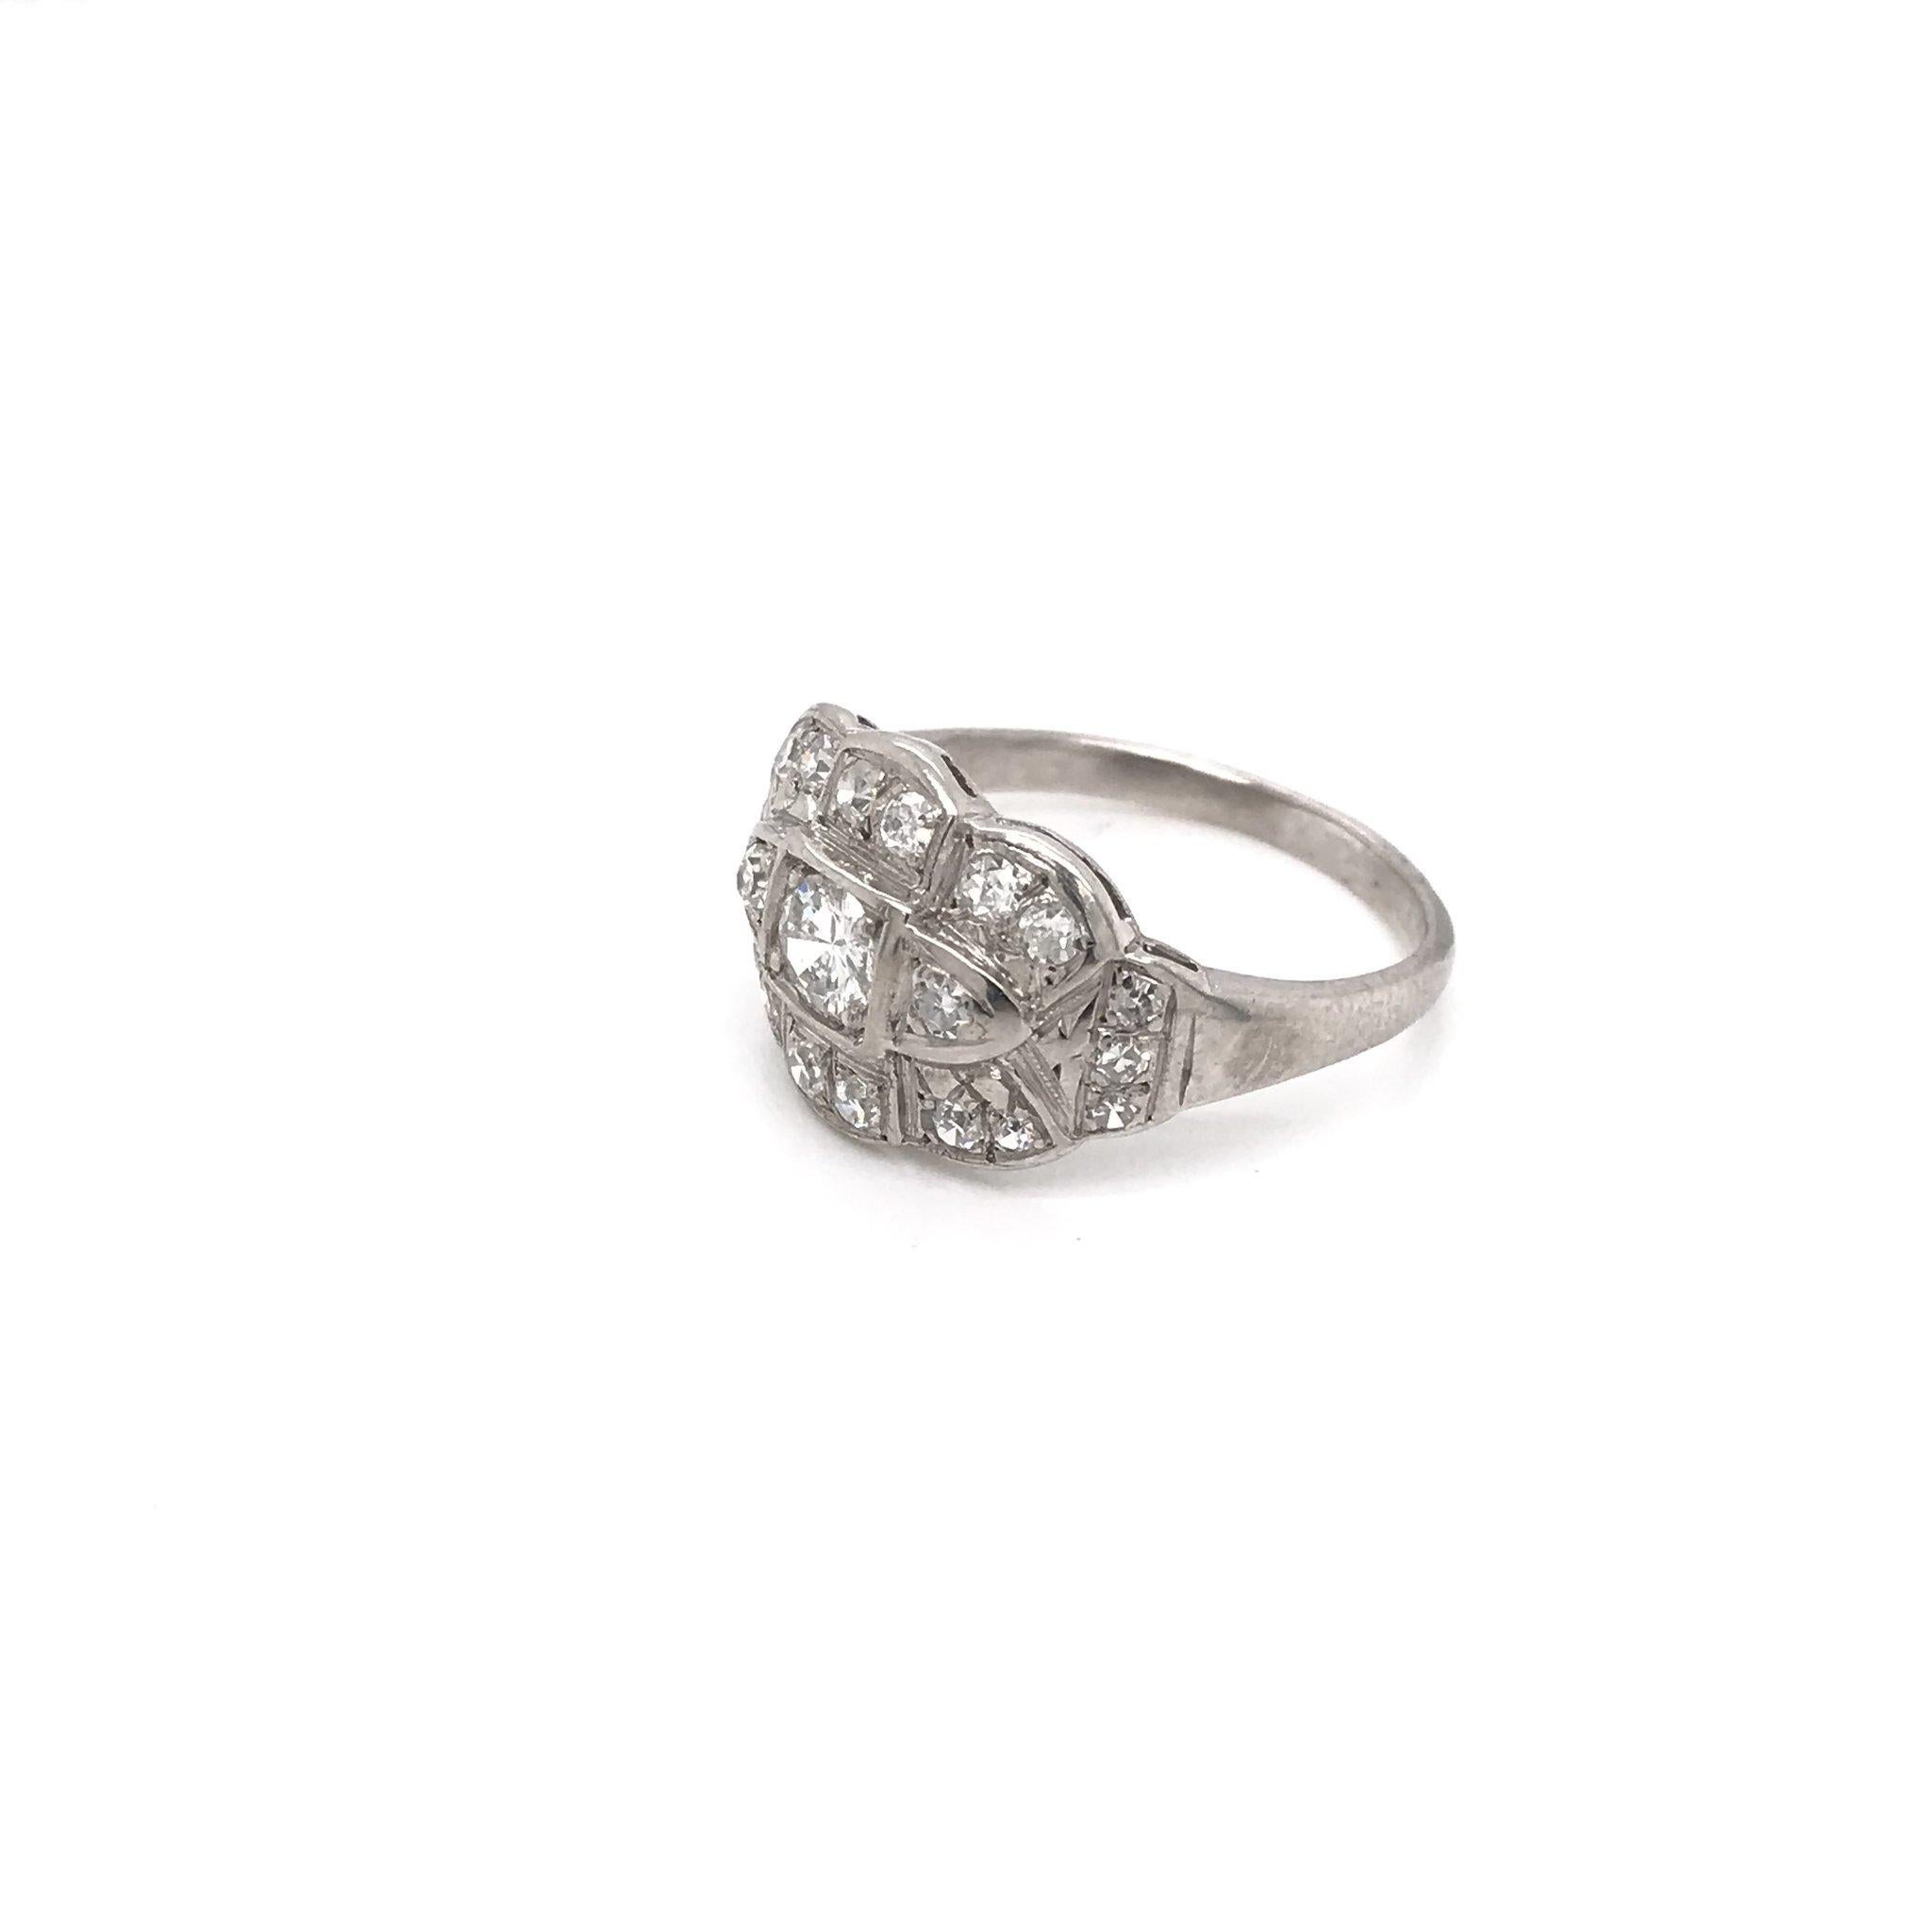 This vintage piece was crafted sometime during the Mid Century design period ( 1940-1960 ). The setting is 14k white gold and features 21 sparkling white diamonds. This ring is beautifully classic and understated, a perfect piece to wear everyday.